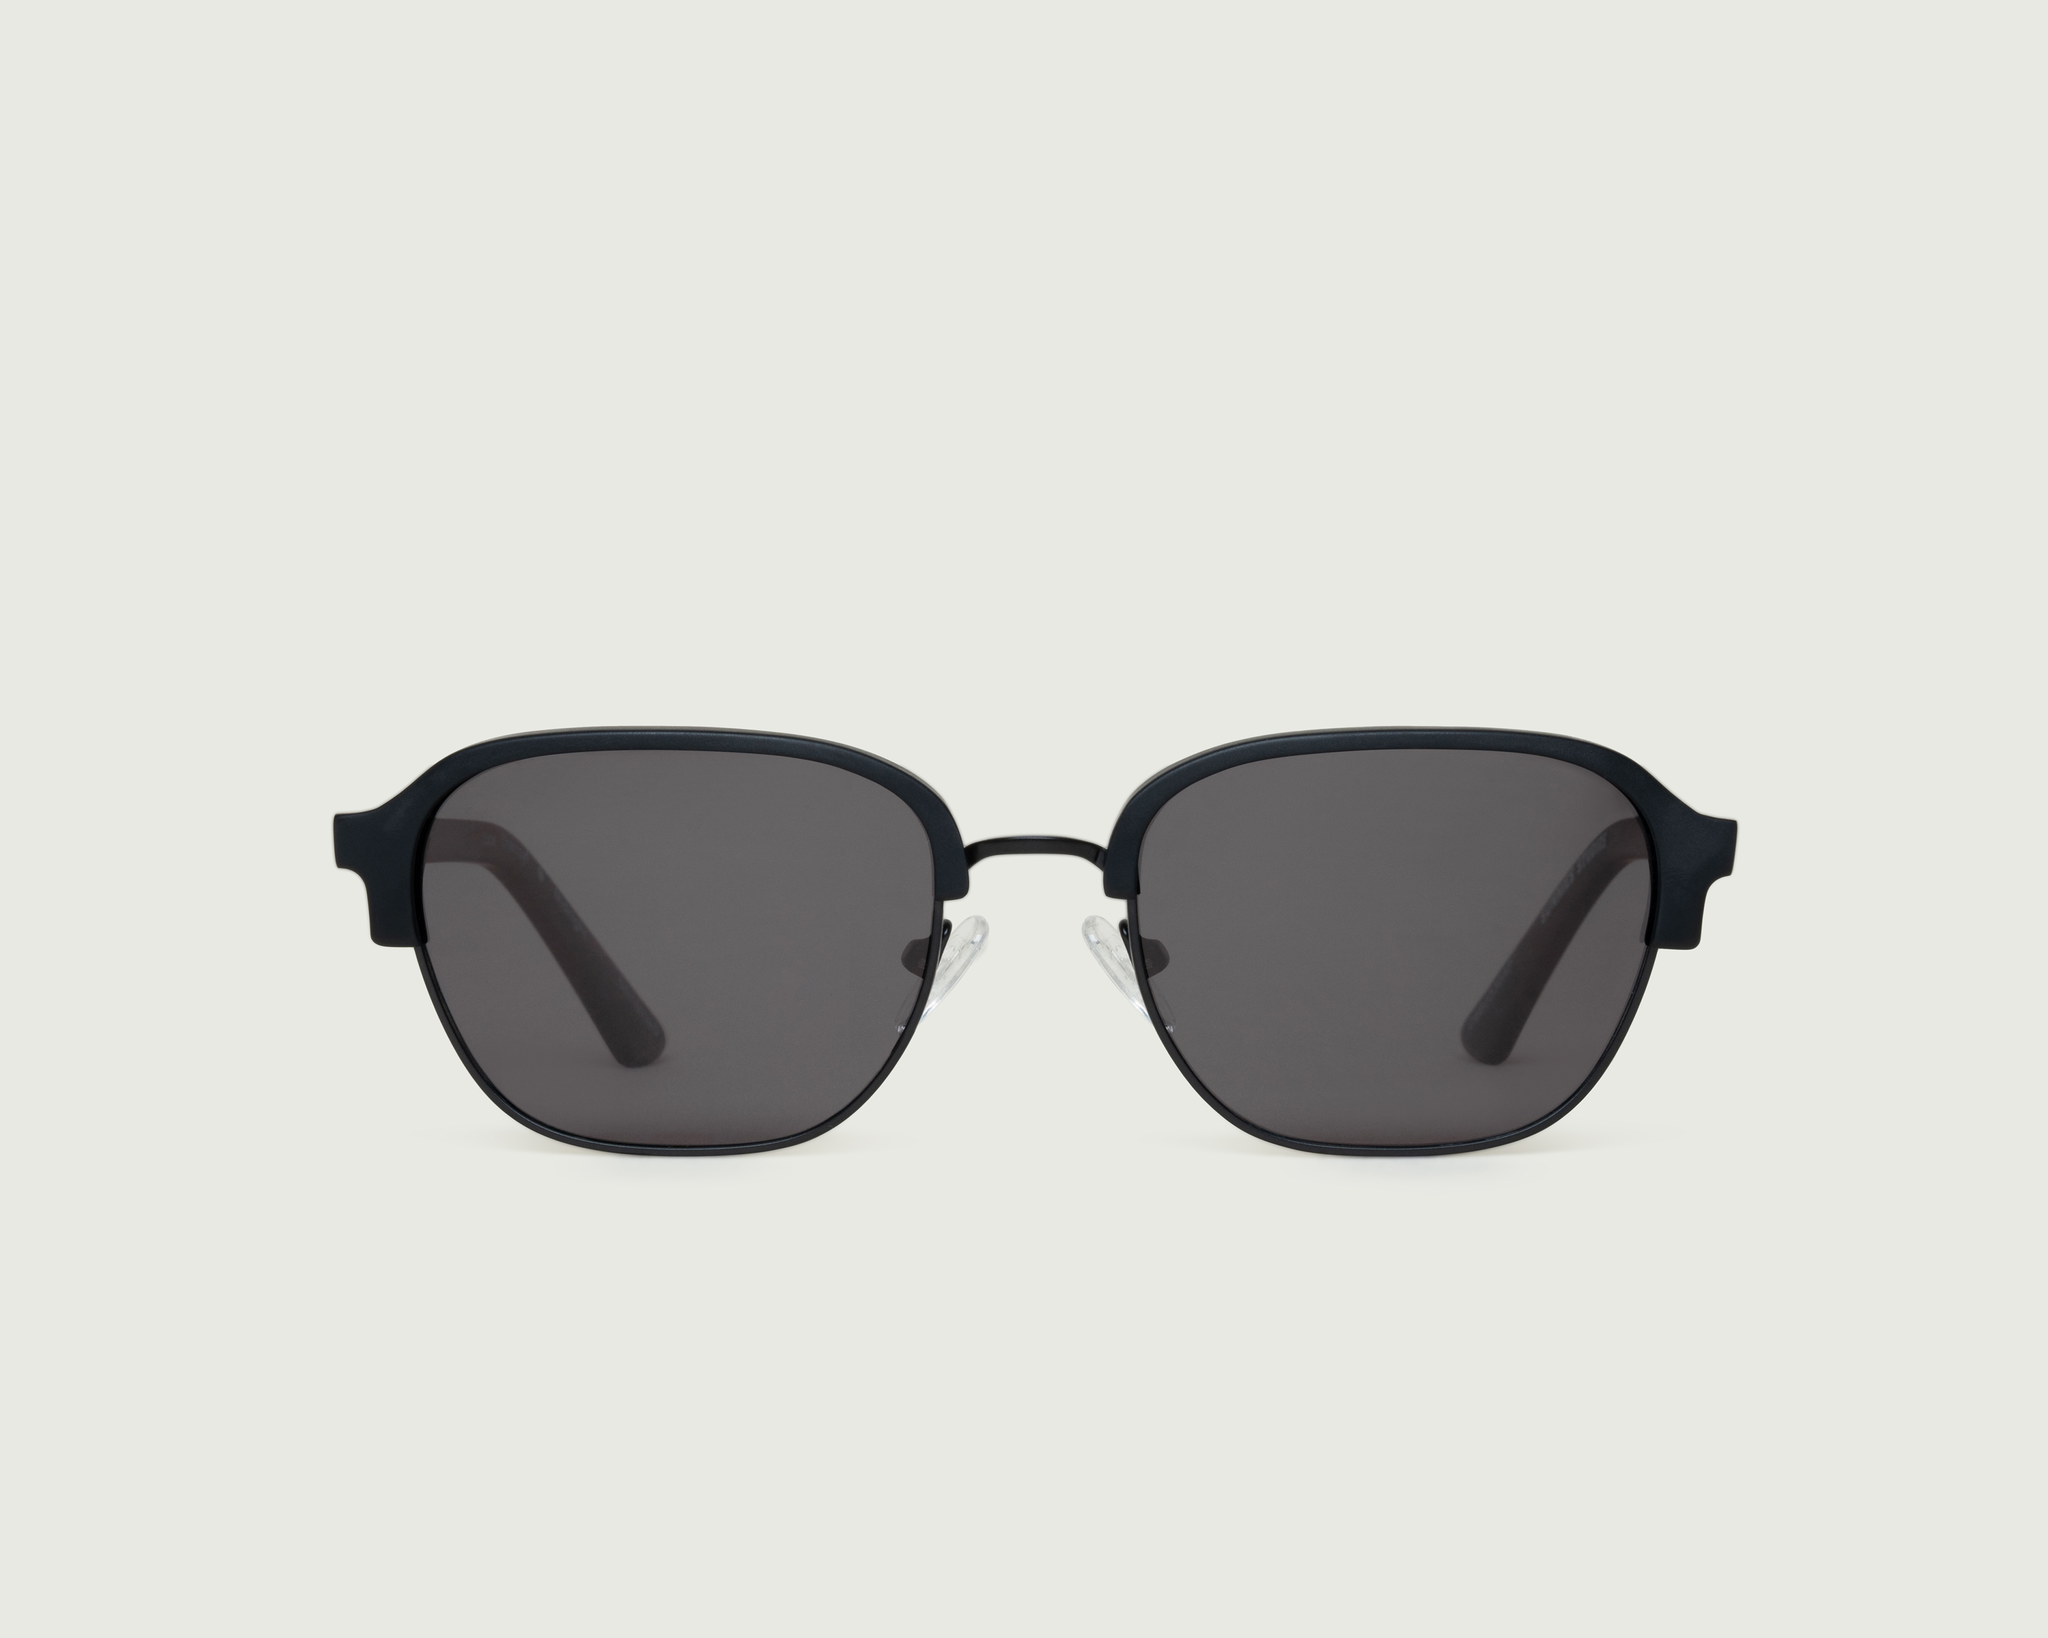 Charcoal Polarized::Luca Sunglasses square black metal front